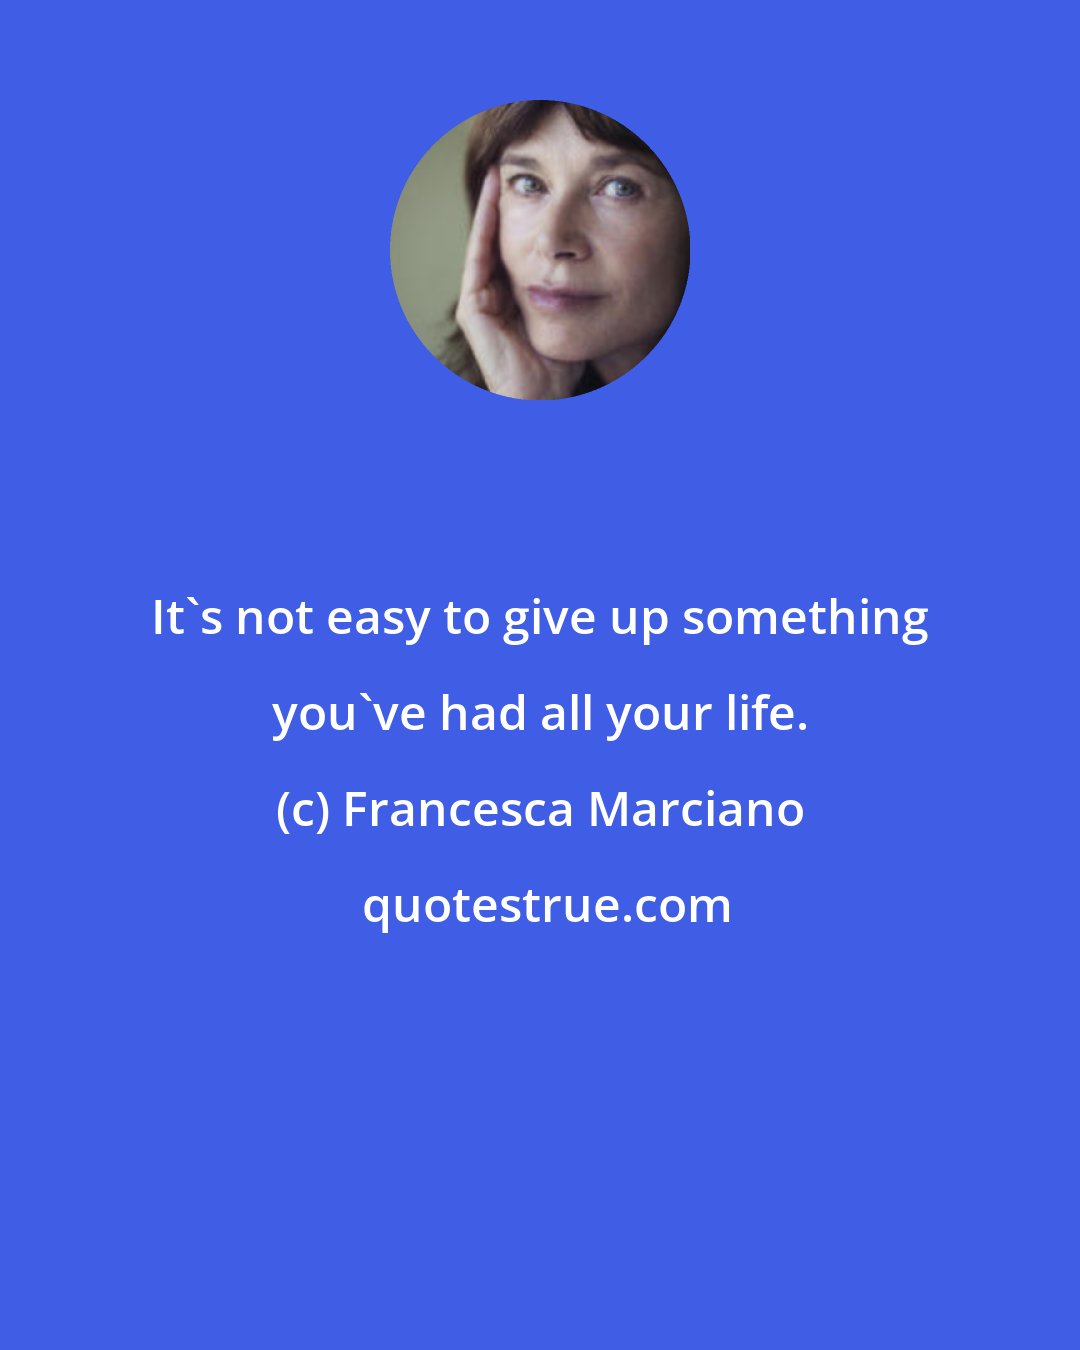 Francesca Marciano: It's not easy to give up something you've had all your life.